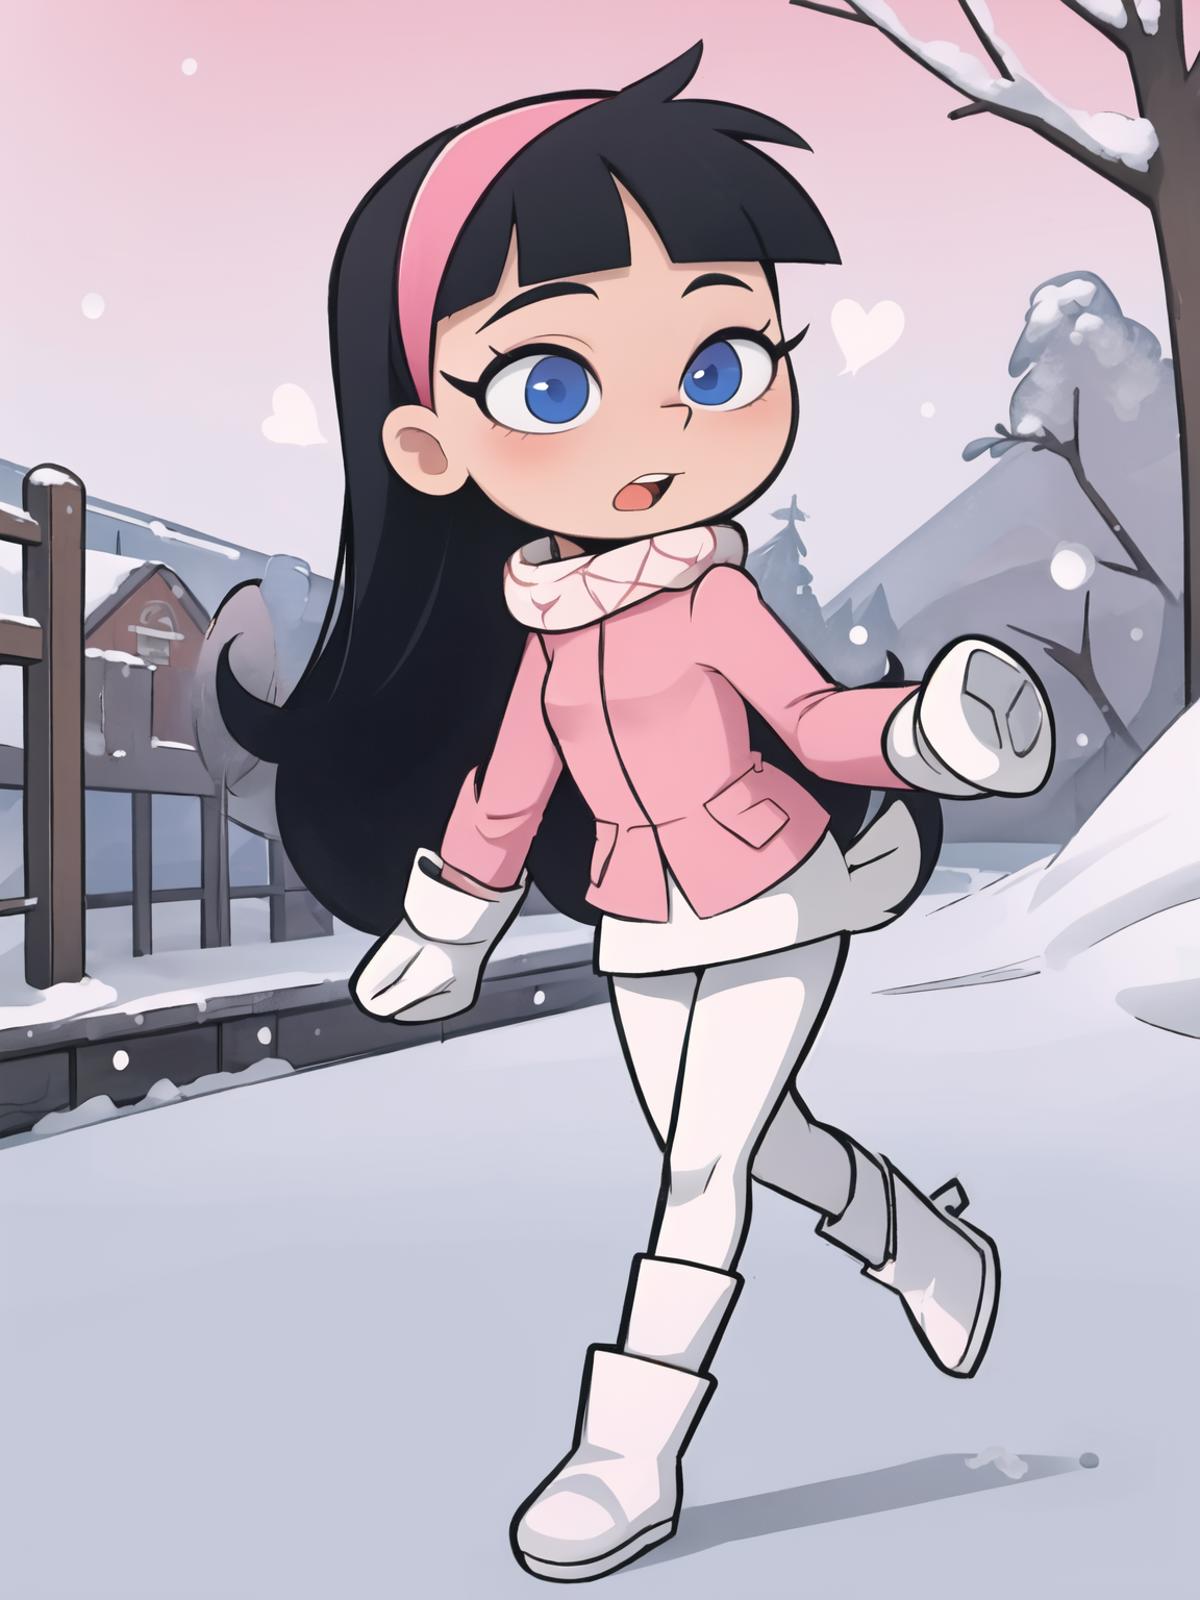 Trixie Tang [ The Fairly OddParents ] image by ManaMomo